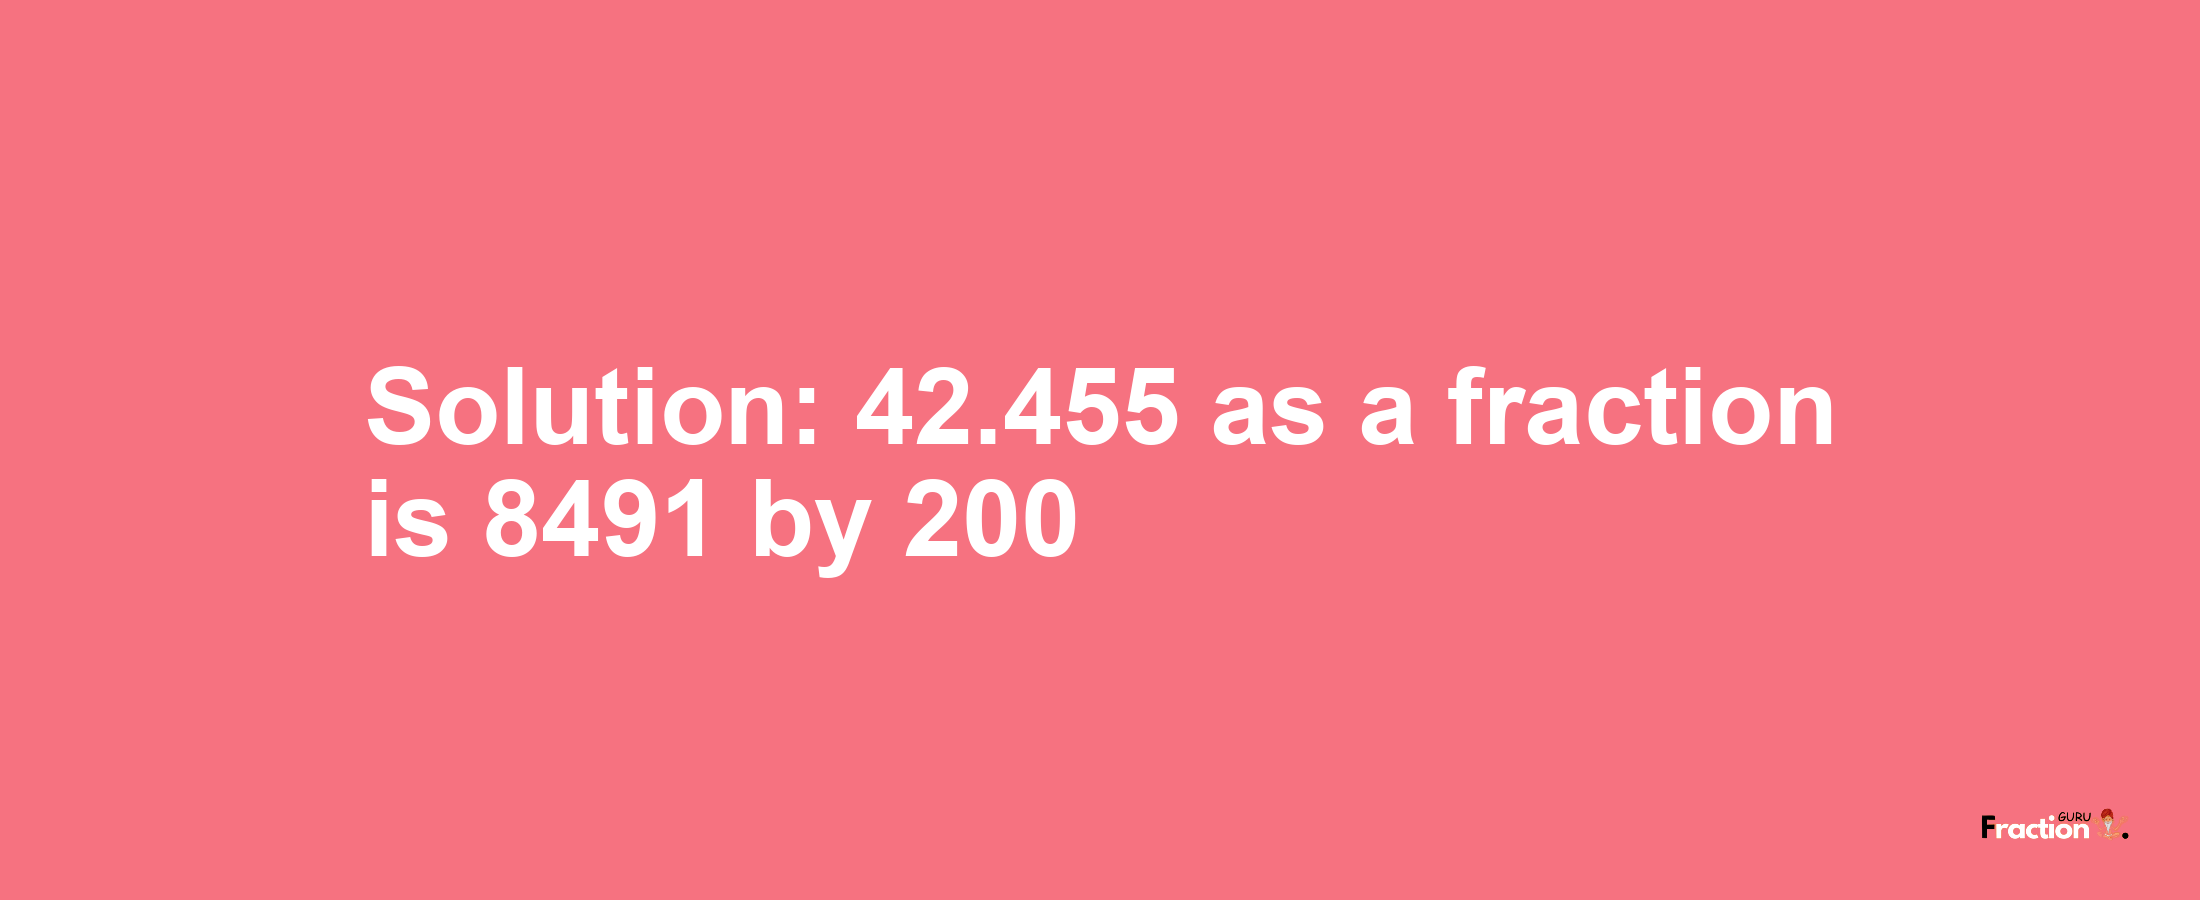 Solution:42.455 as a fraction is 8491/200